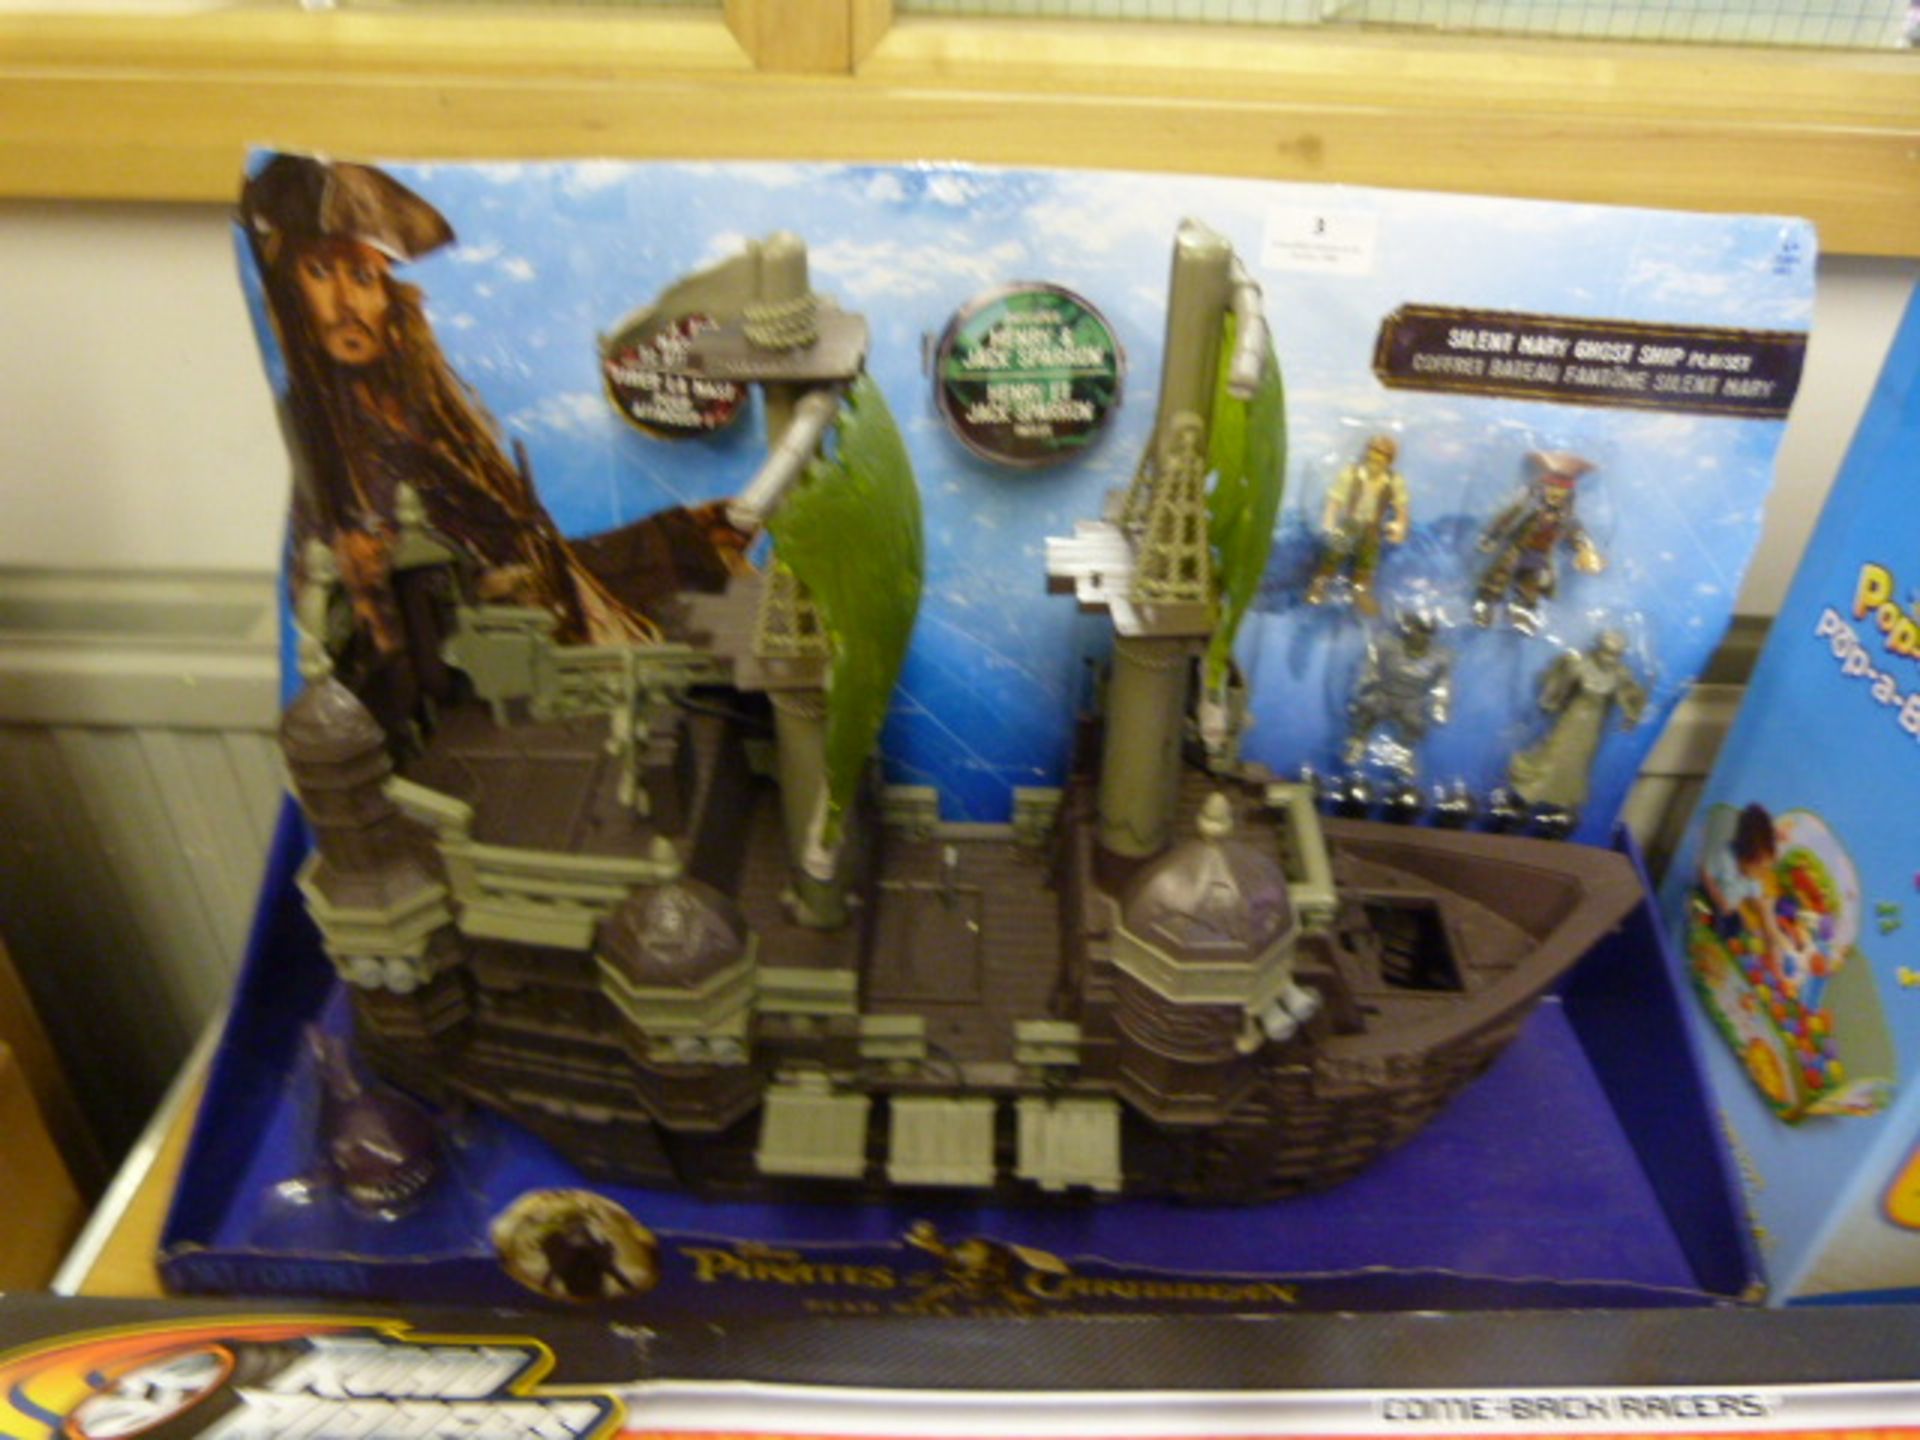 *Pirates of the Caribbean Silent Mary Ghost Ship Play Set